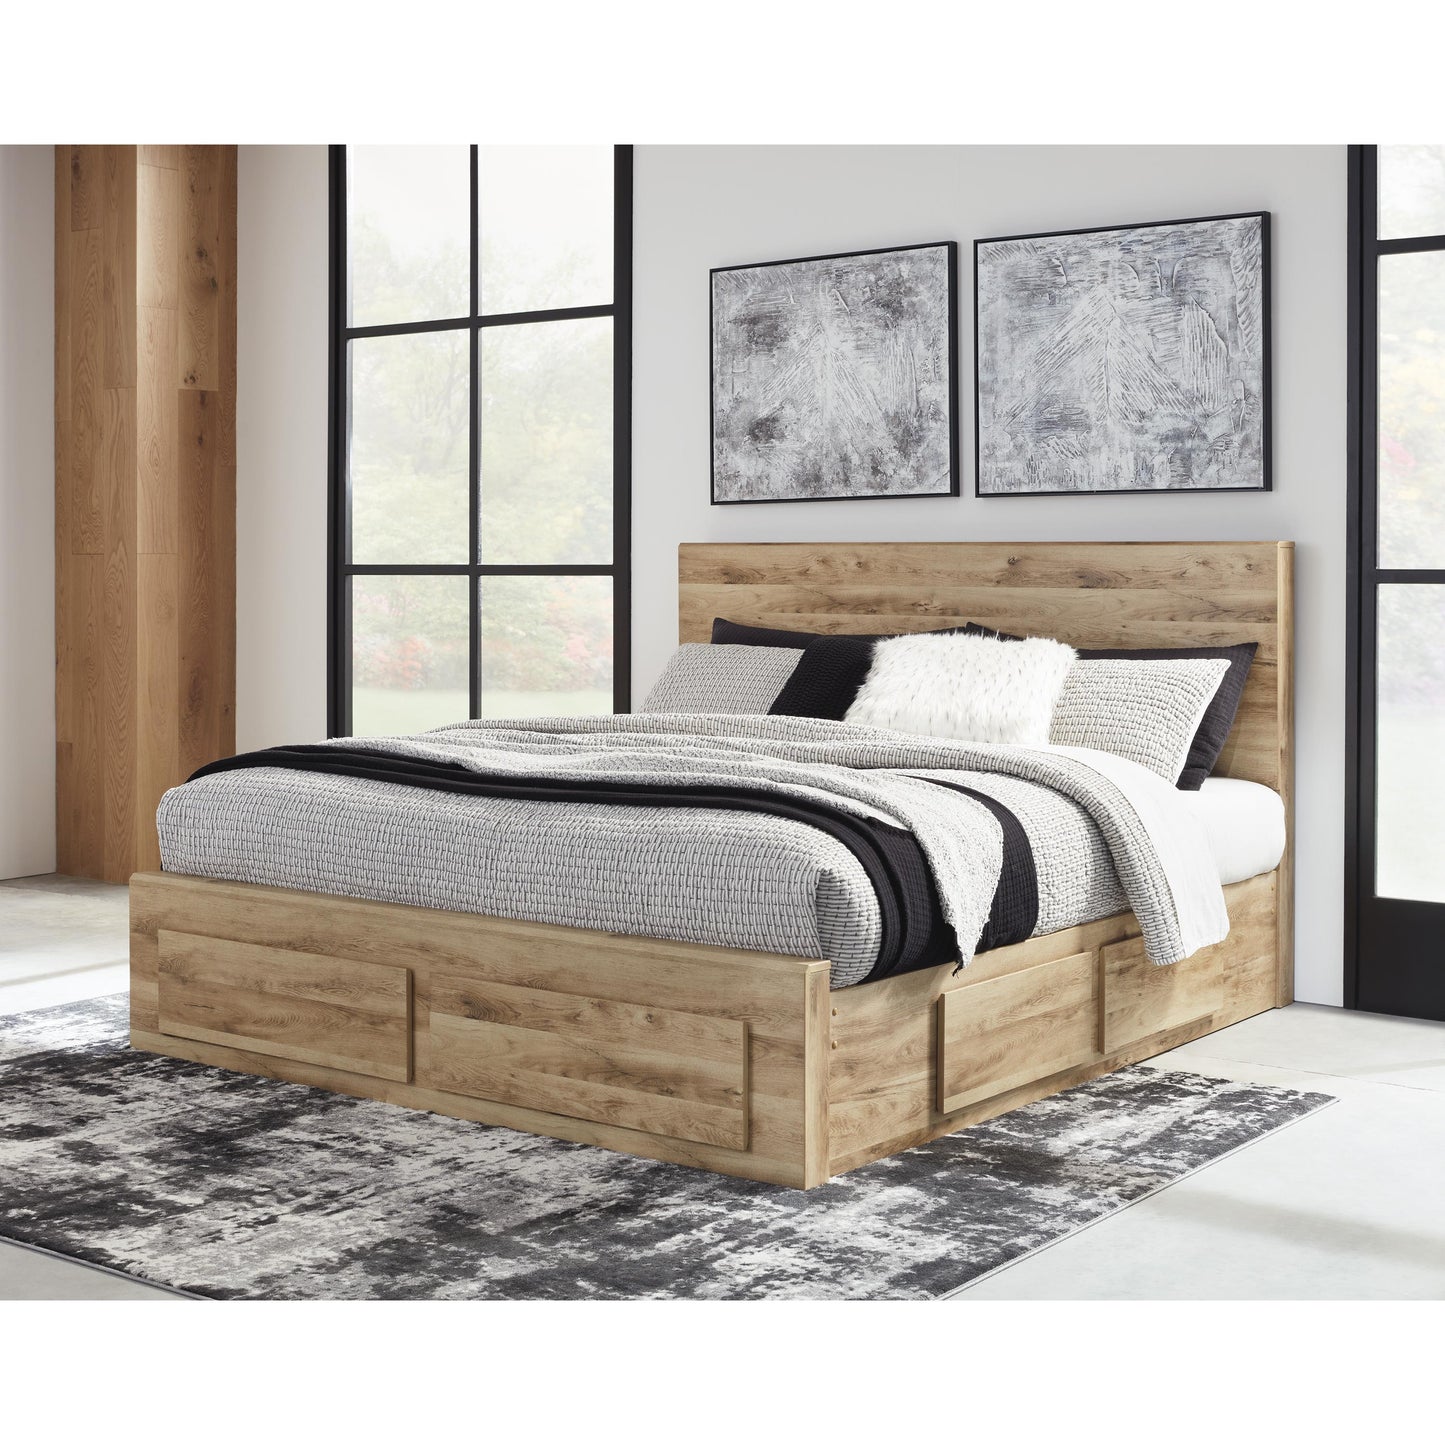 Signature Design by Ashley Hyanna Queen Panel Bed with Storage B1050-57/B1050-54S/B1050-60/B1050-95/B100-13 IMAGE 5